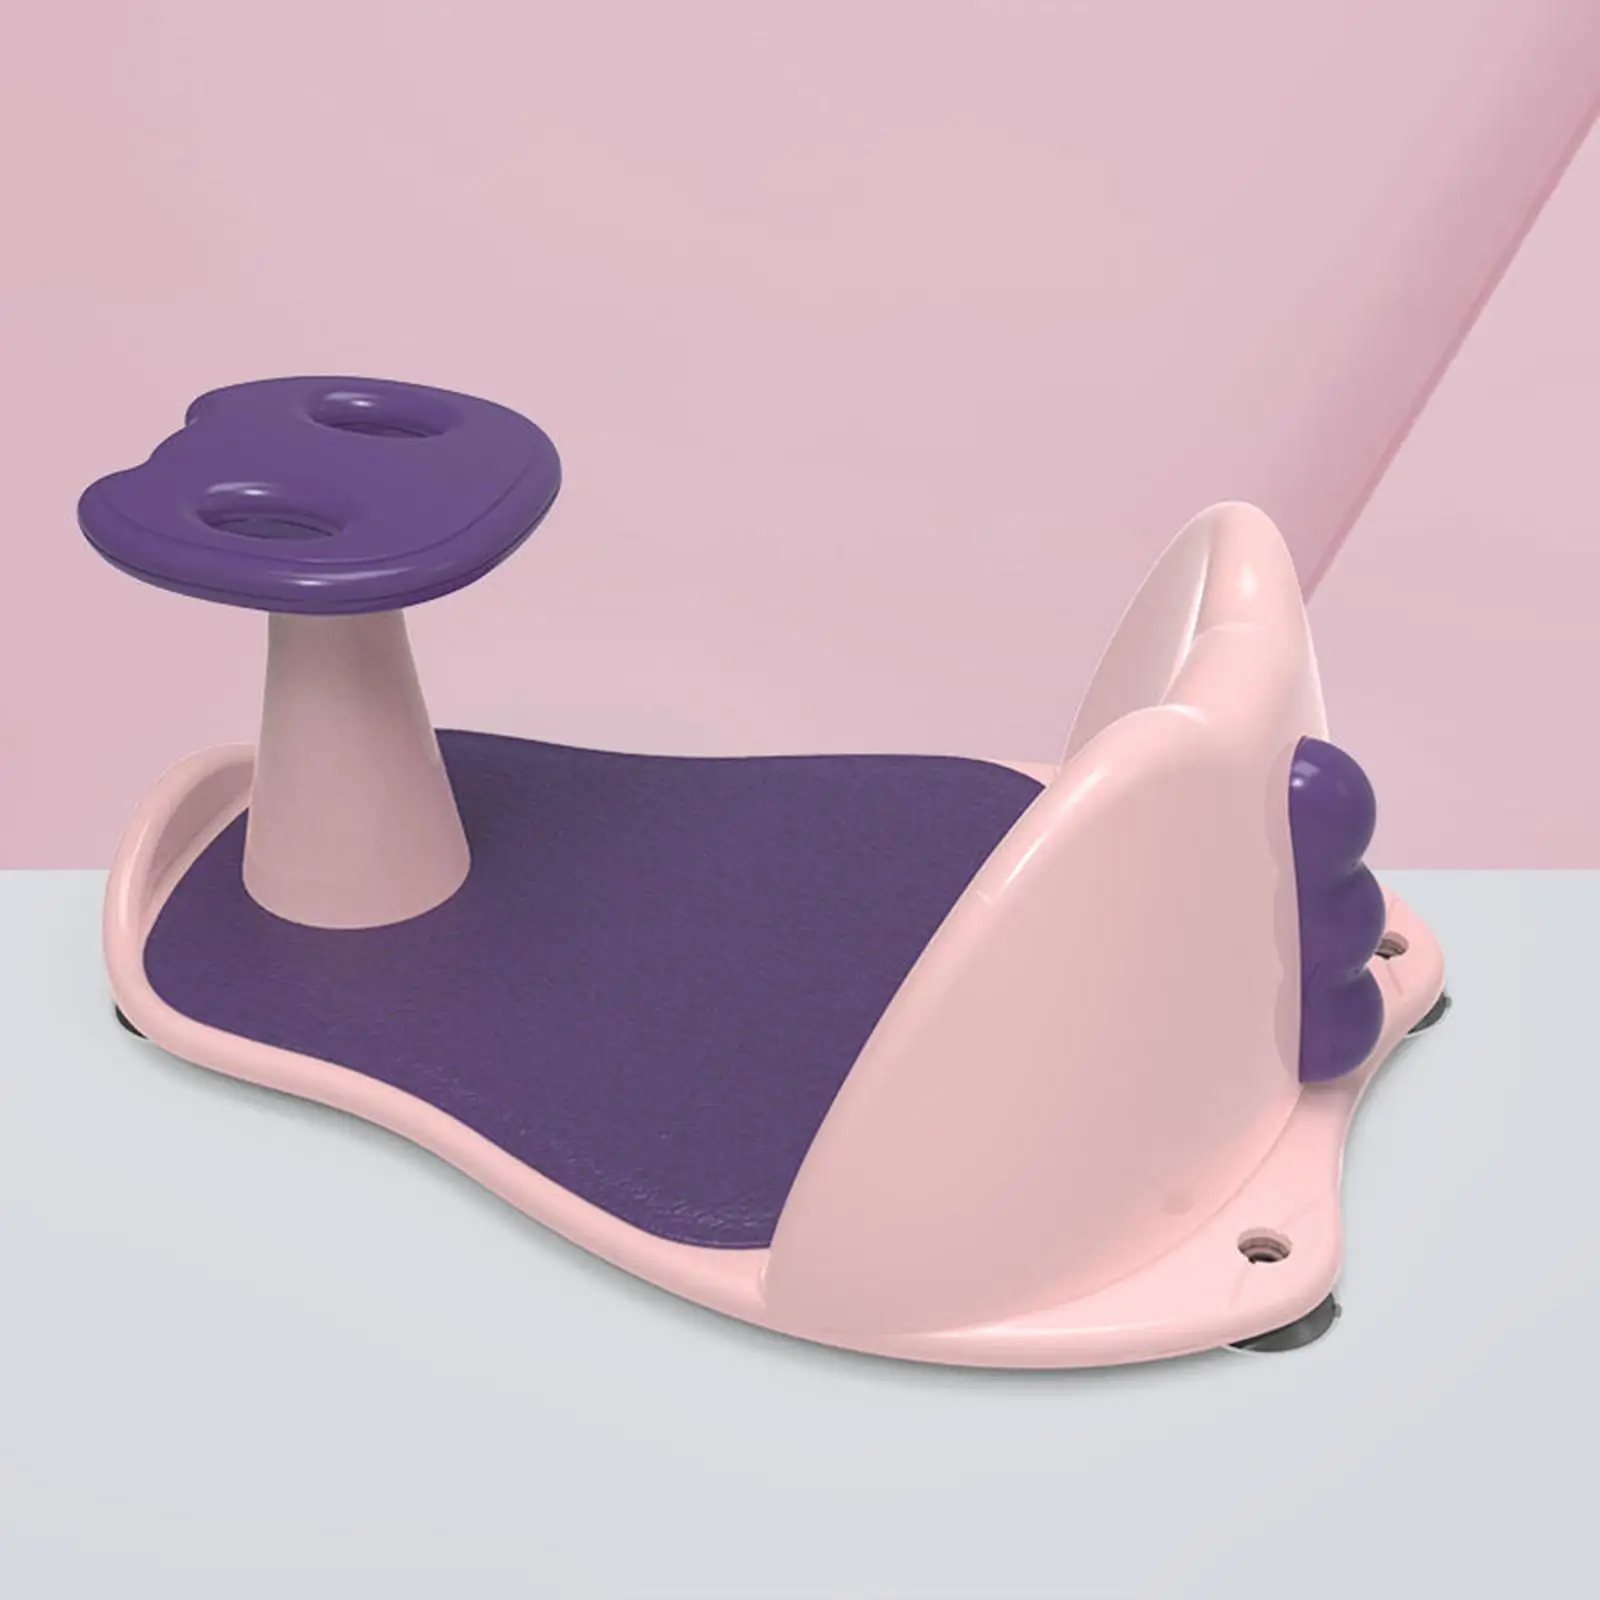 Contoured  Seat Open-Side  Drain Holes Seat Tub   Bathtub Seat for Babies SitBathing in the Sink Counter